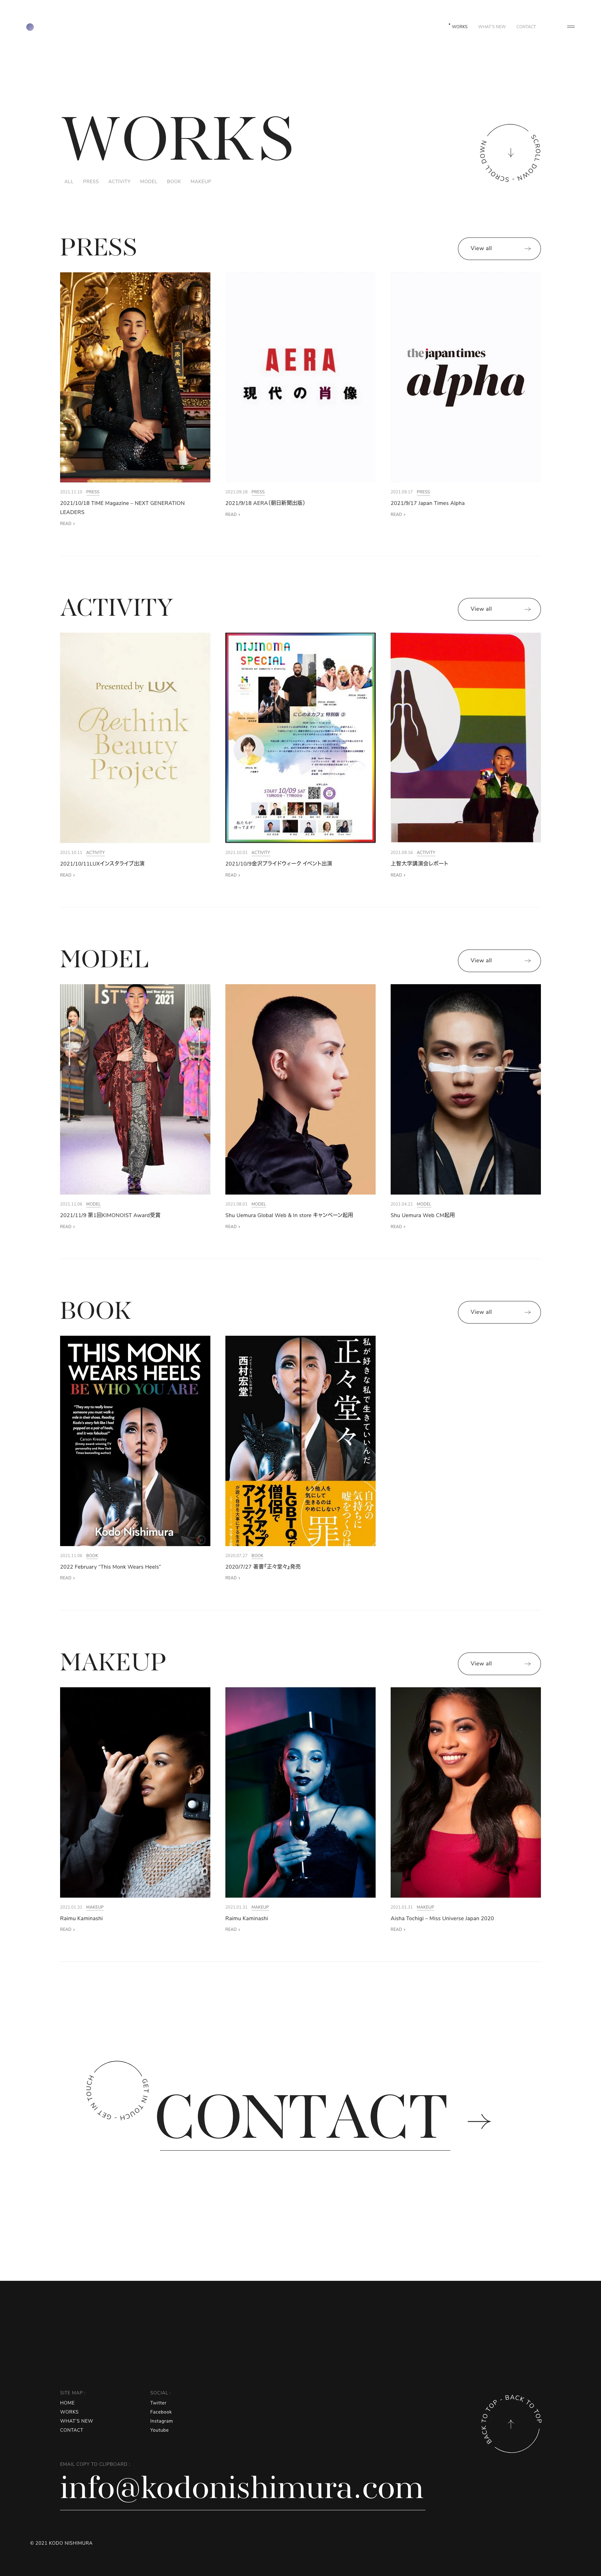 Kodo Nishimura Landing Page Example: Kodo Nishimura is a Buddhist monk and a makeup artist born in Tokyo in 1989. He graduated from the Parsons School of Design in New York. After graduating, he started to thrive as a makeup artist, working behind the scenes of Miss Universe and NY Fashion Week. In 2015, Kodo trained to be a monk and was certified by the Pure Land school.